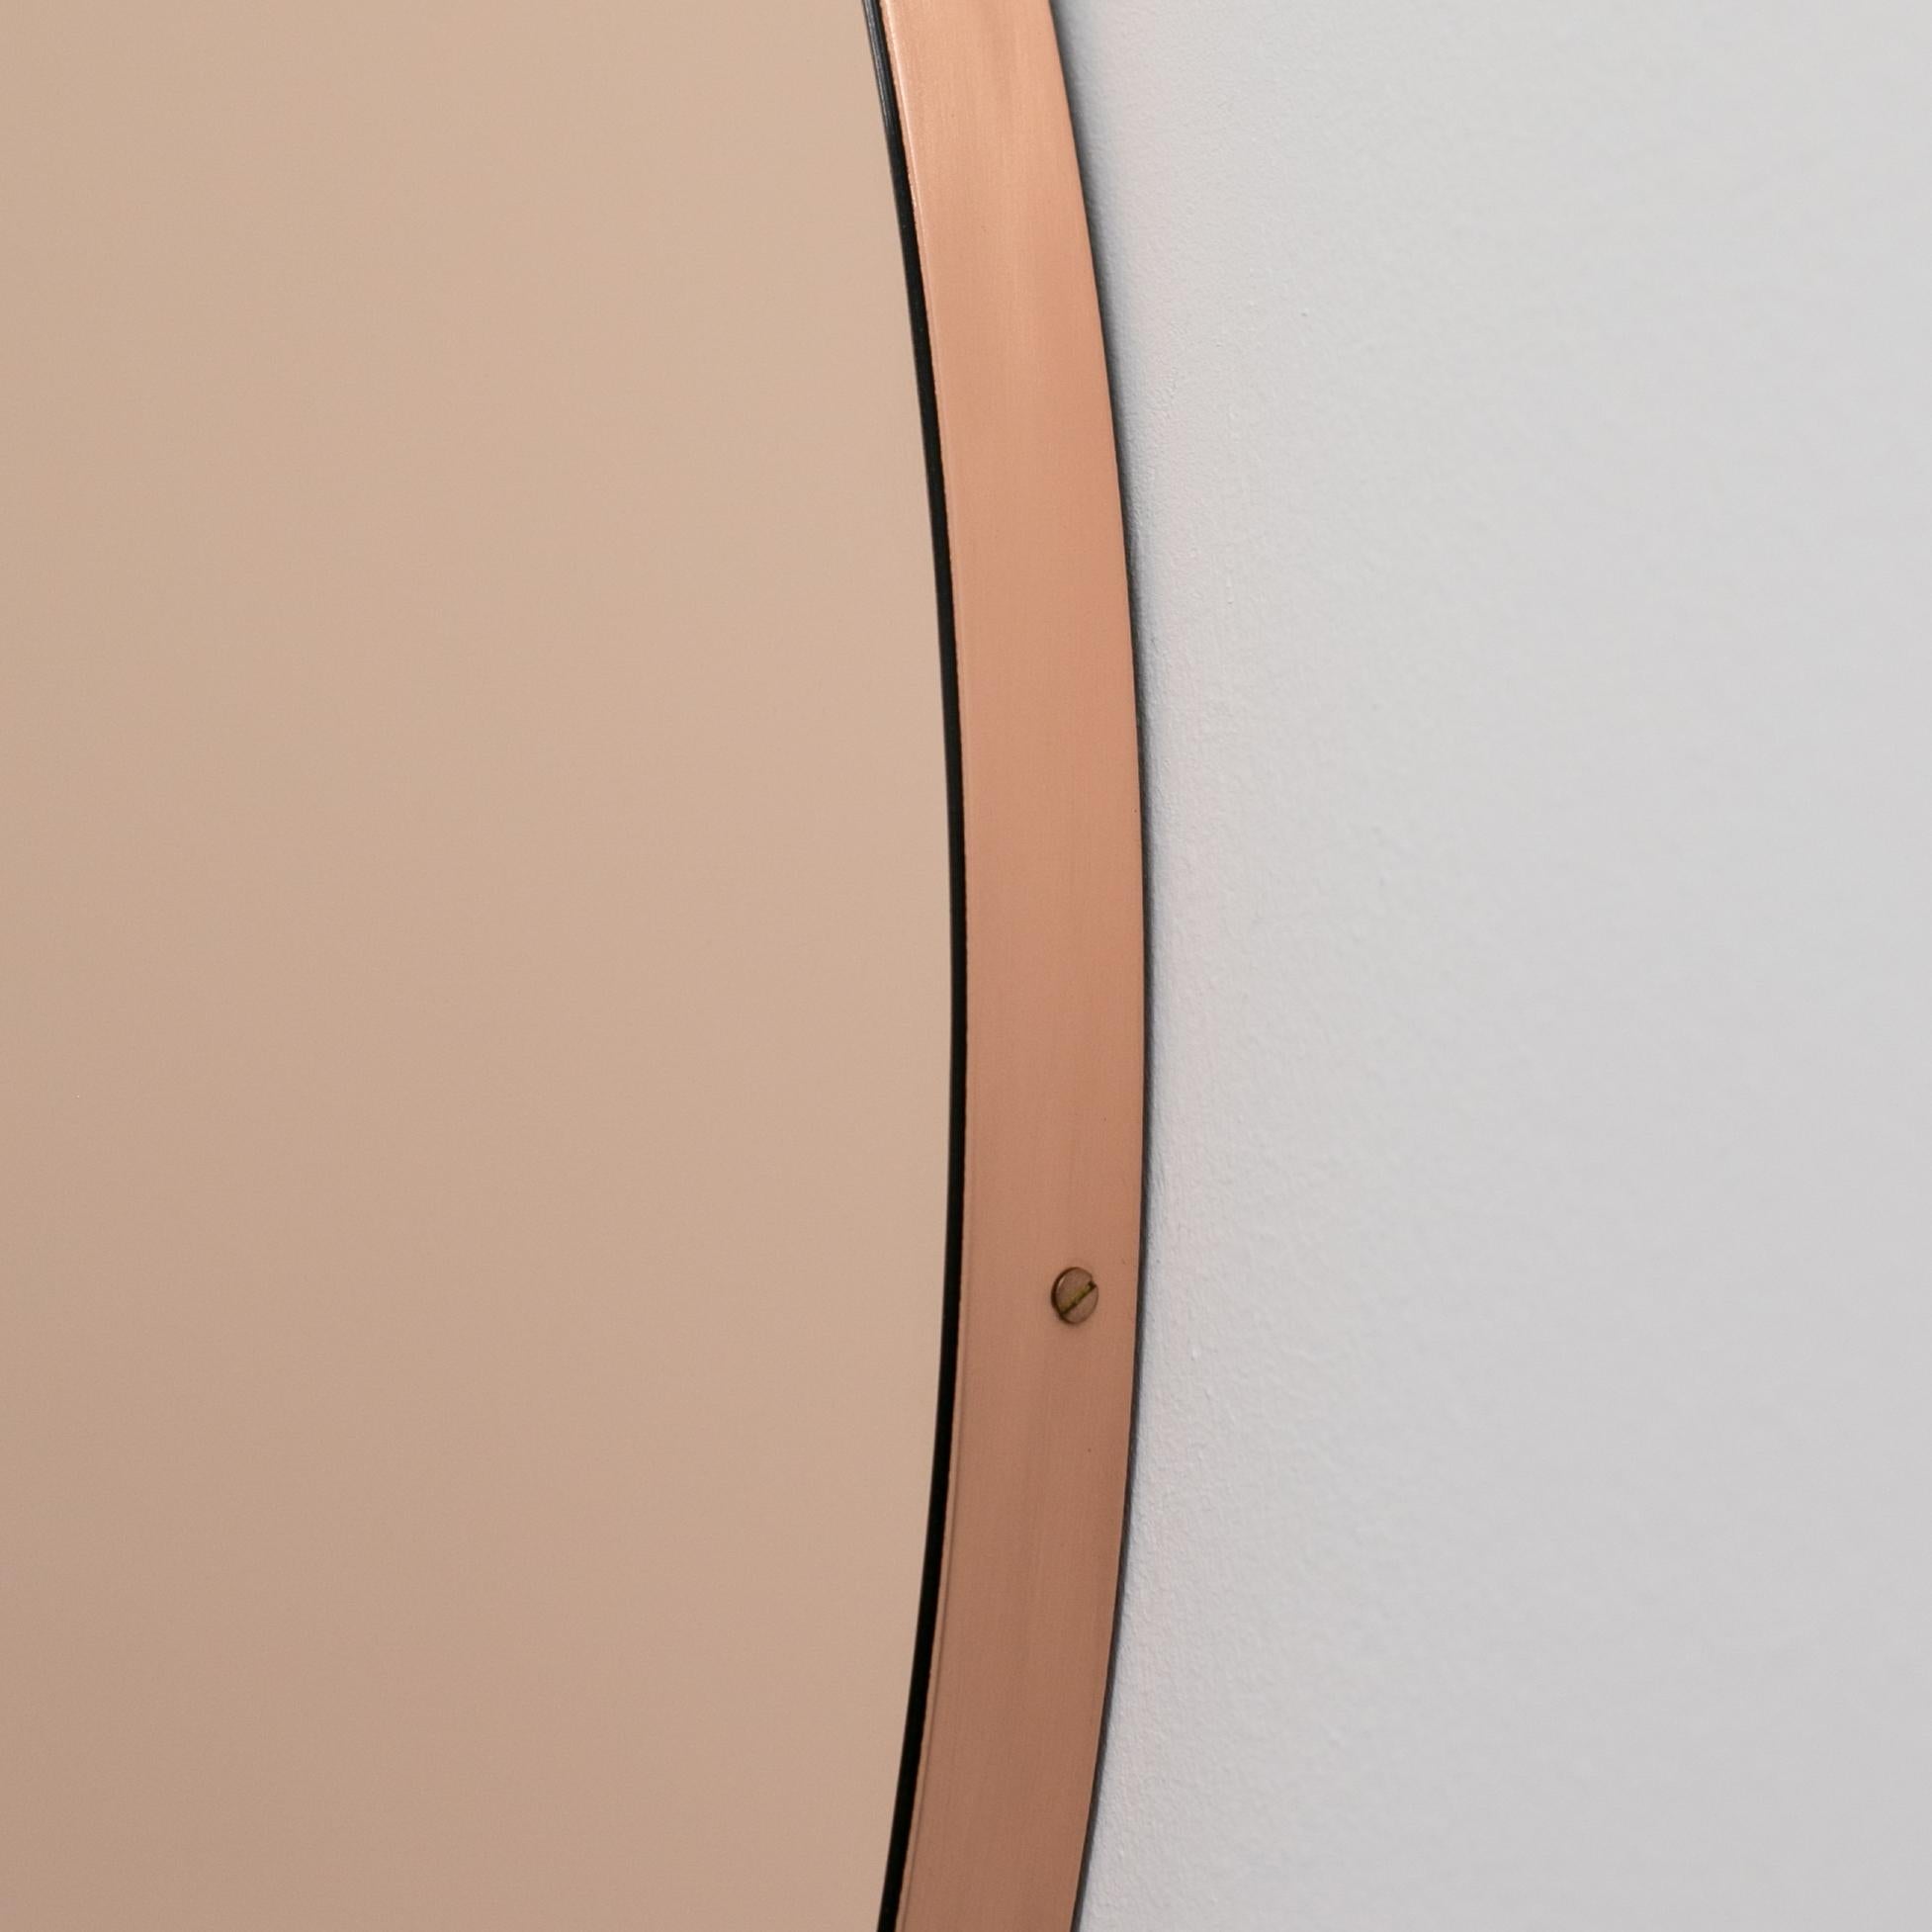 Bespoke Listing for Aurore Orbis dualis Rose gold+silver Brushed brass frame  4